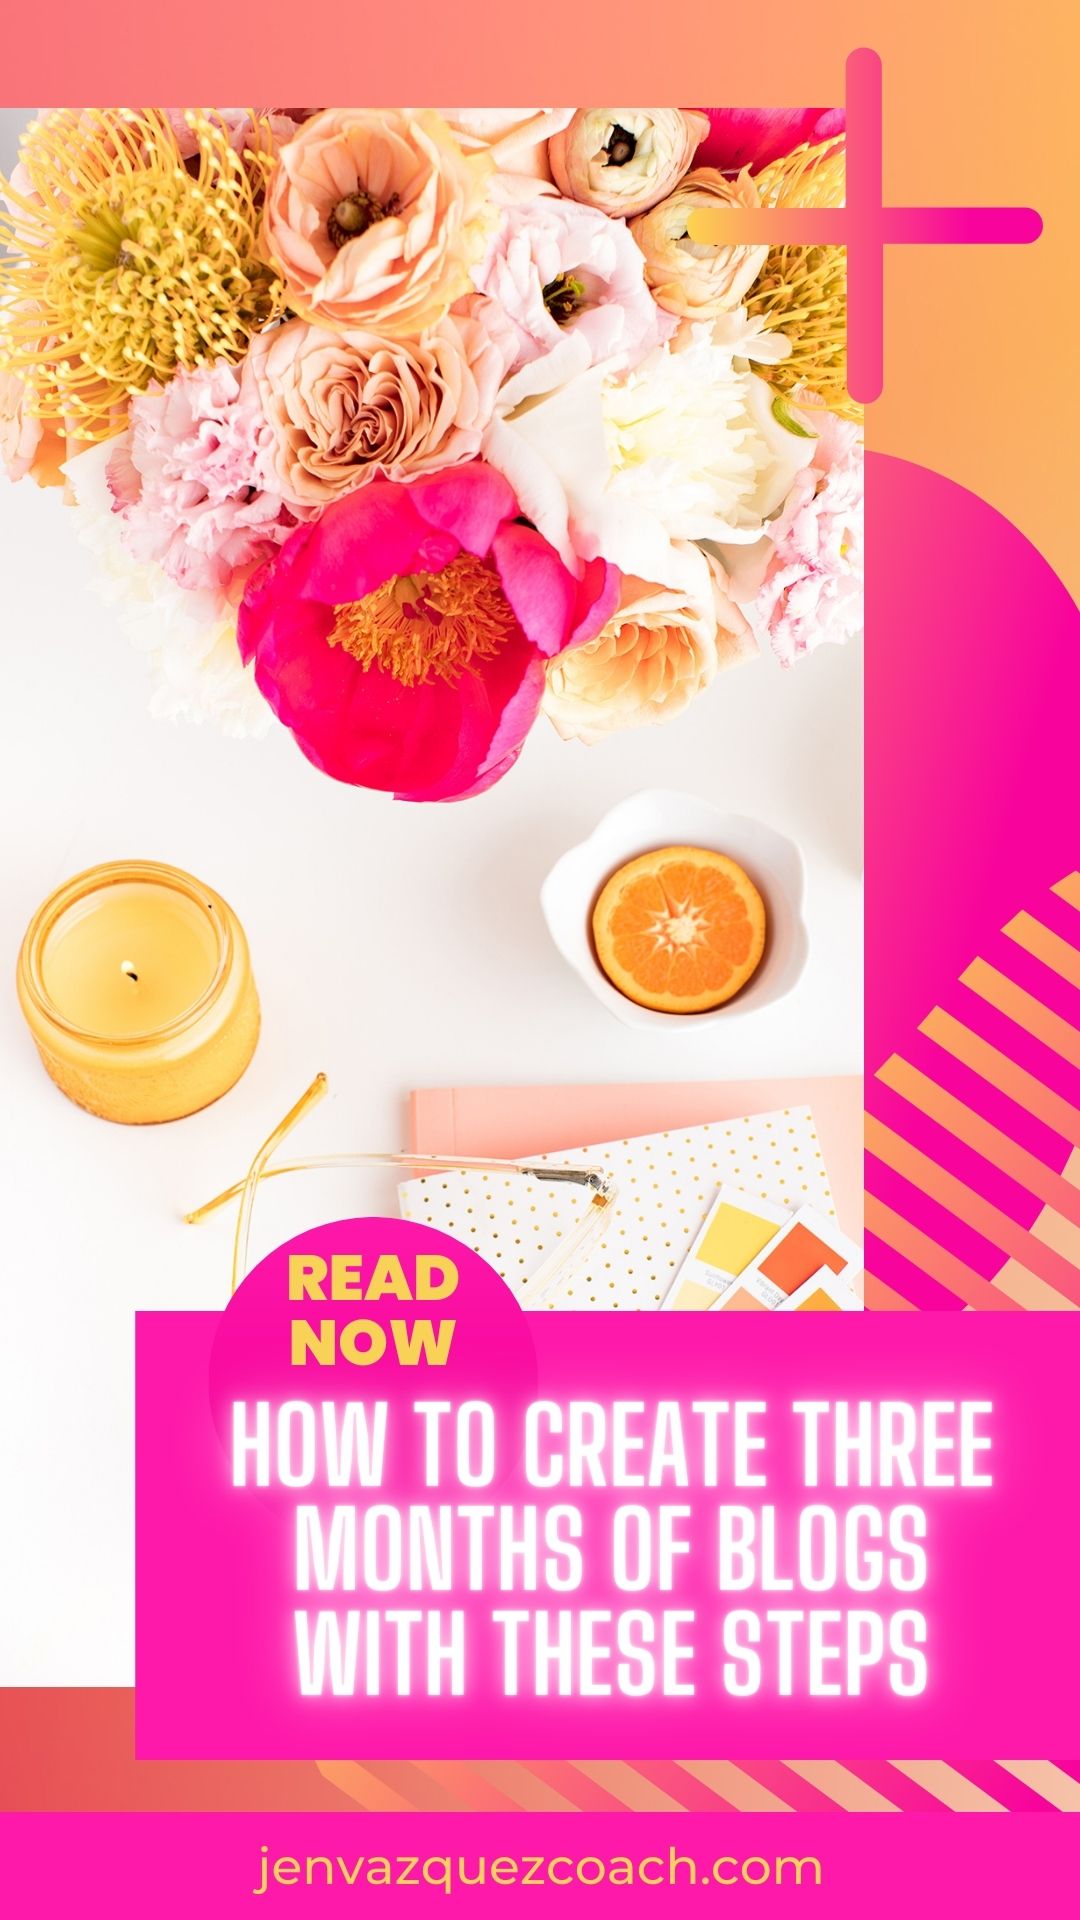 How To Create Three Months of Blogs in 5 Steps